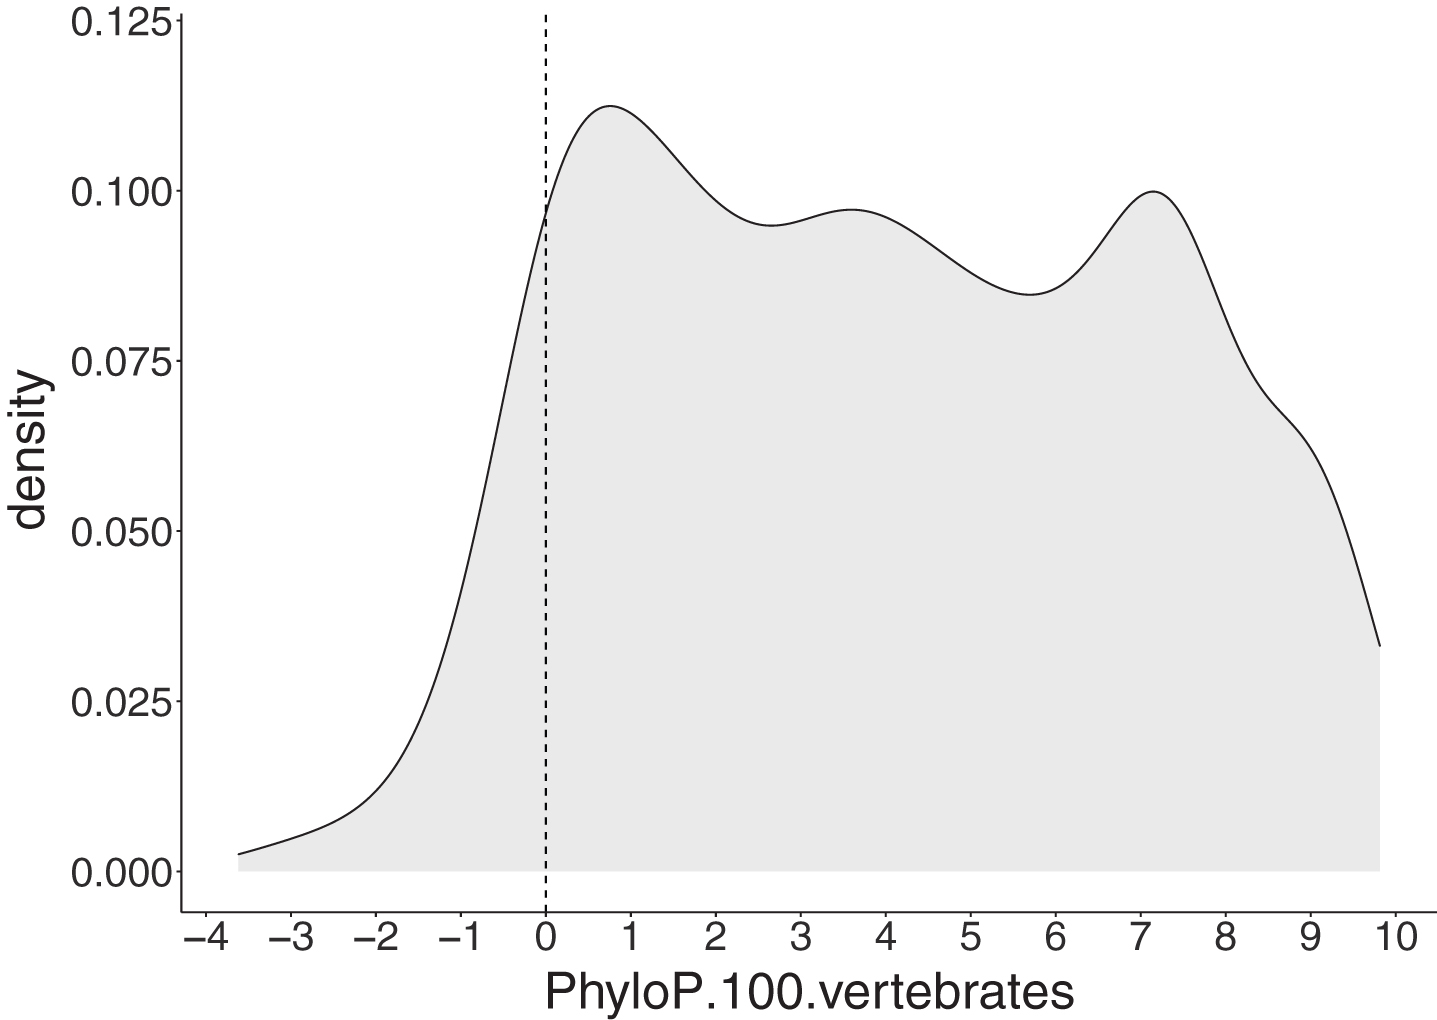 PhyloP scores for 1,051 single nucleotide (SNV) and deletion ALS-implicated variants. The grey area represents a density plot for all PhyloP scores across all variants. The dashed line represents the threshold for evolutionary conservation, with positive and negative scores indicating conserved and fast-evolving sites, respectively.